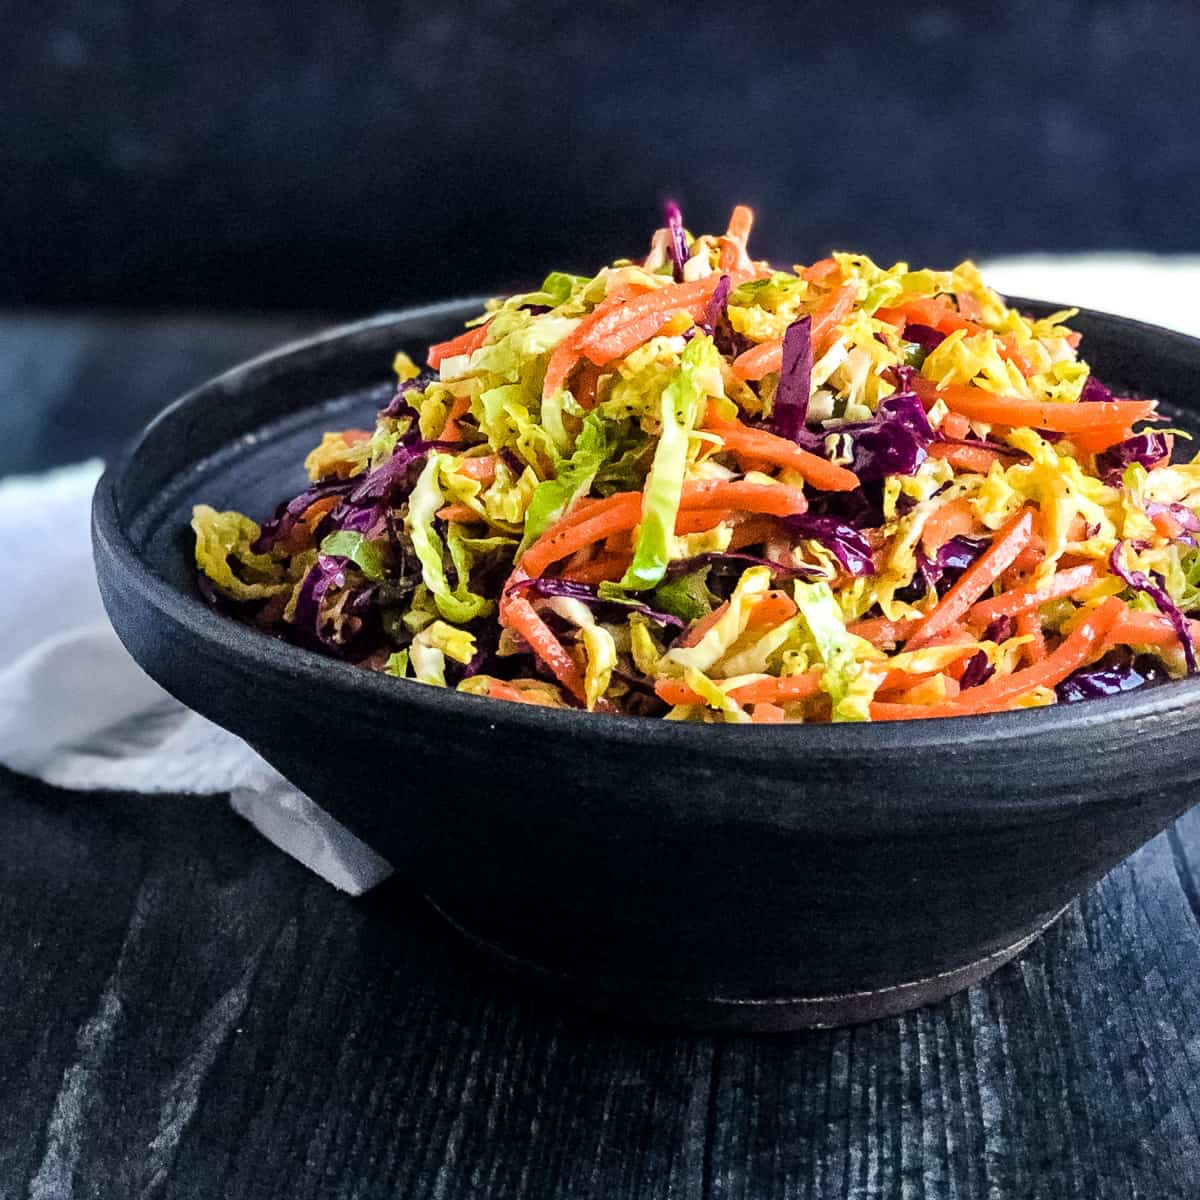 Brussels Sprouts Coleslaw in a black bowl.